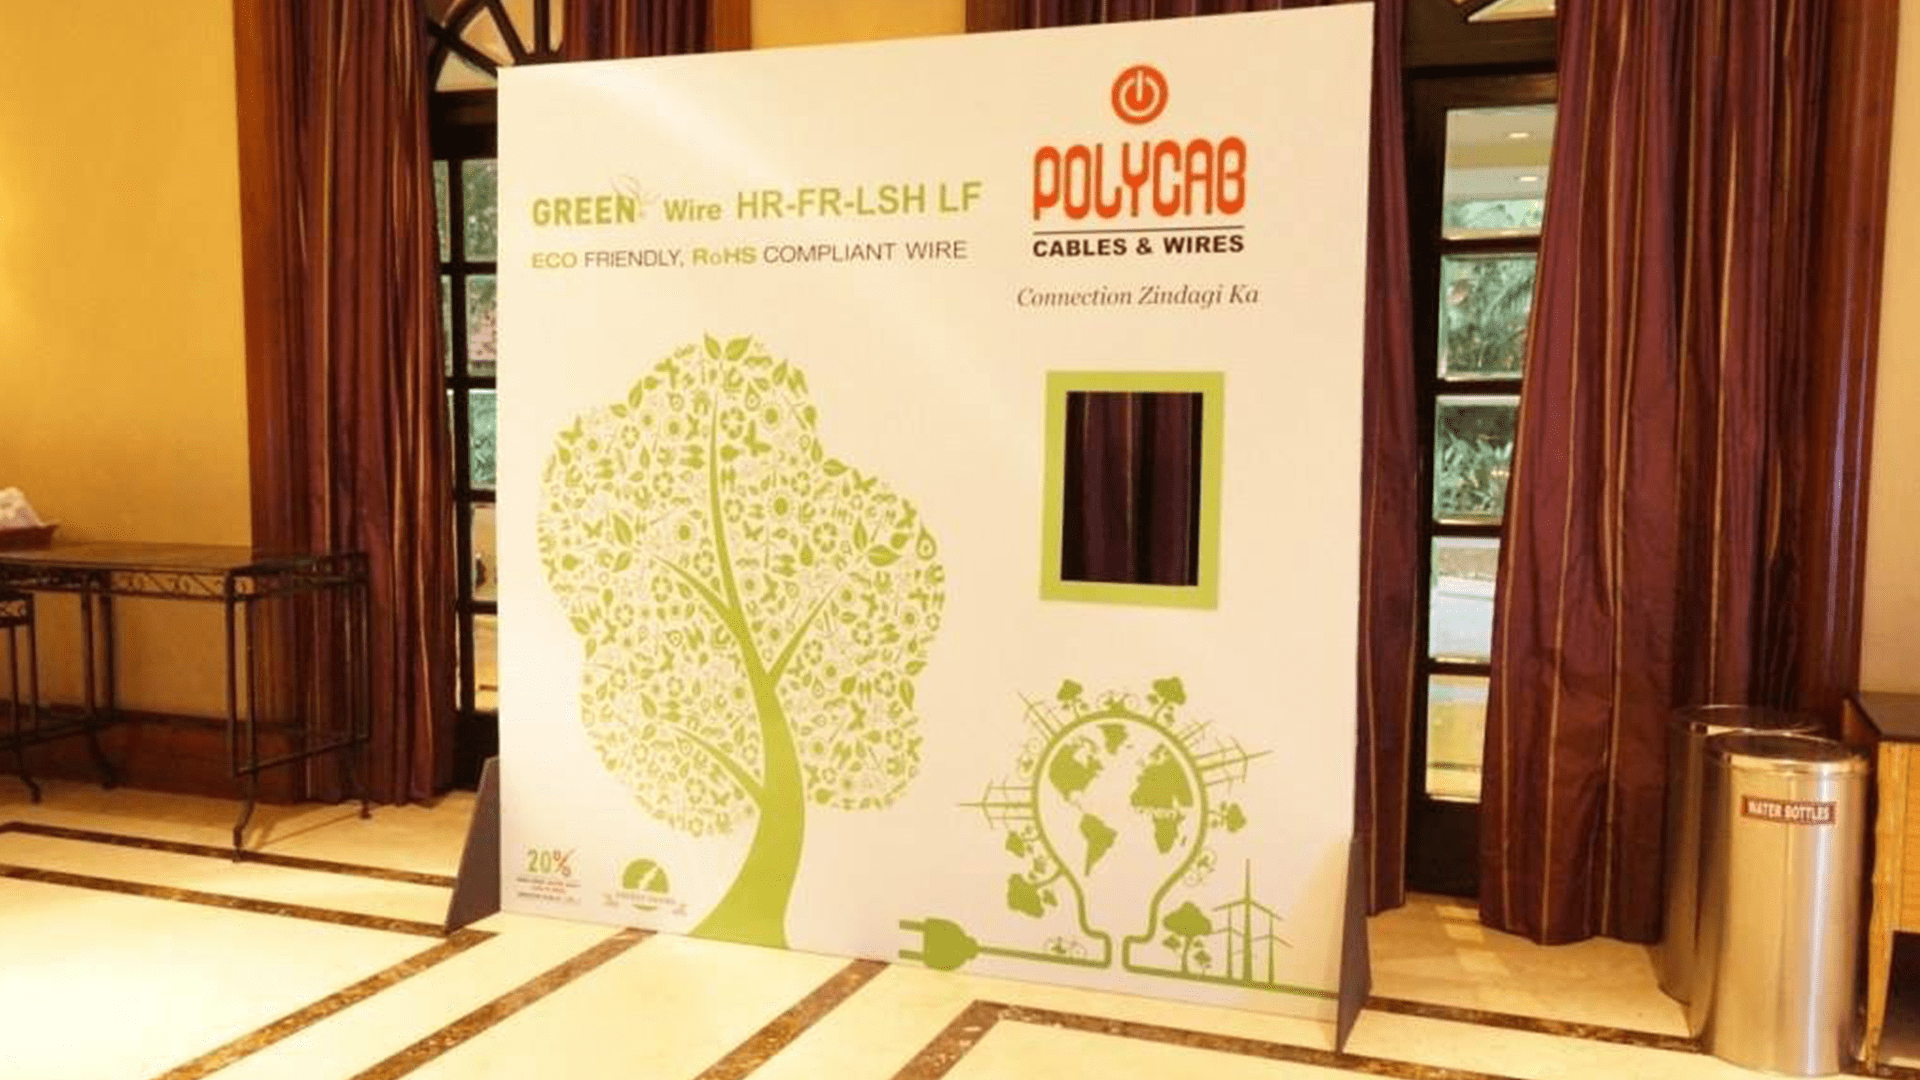 Polycab events green wire launch, kochi